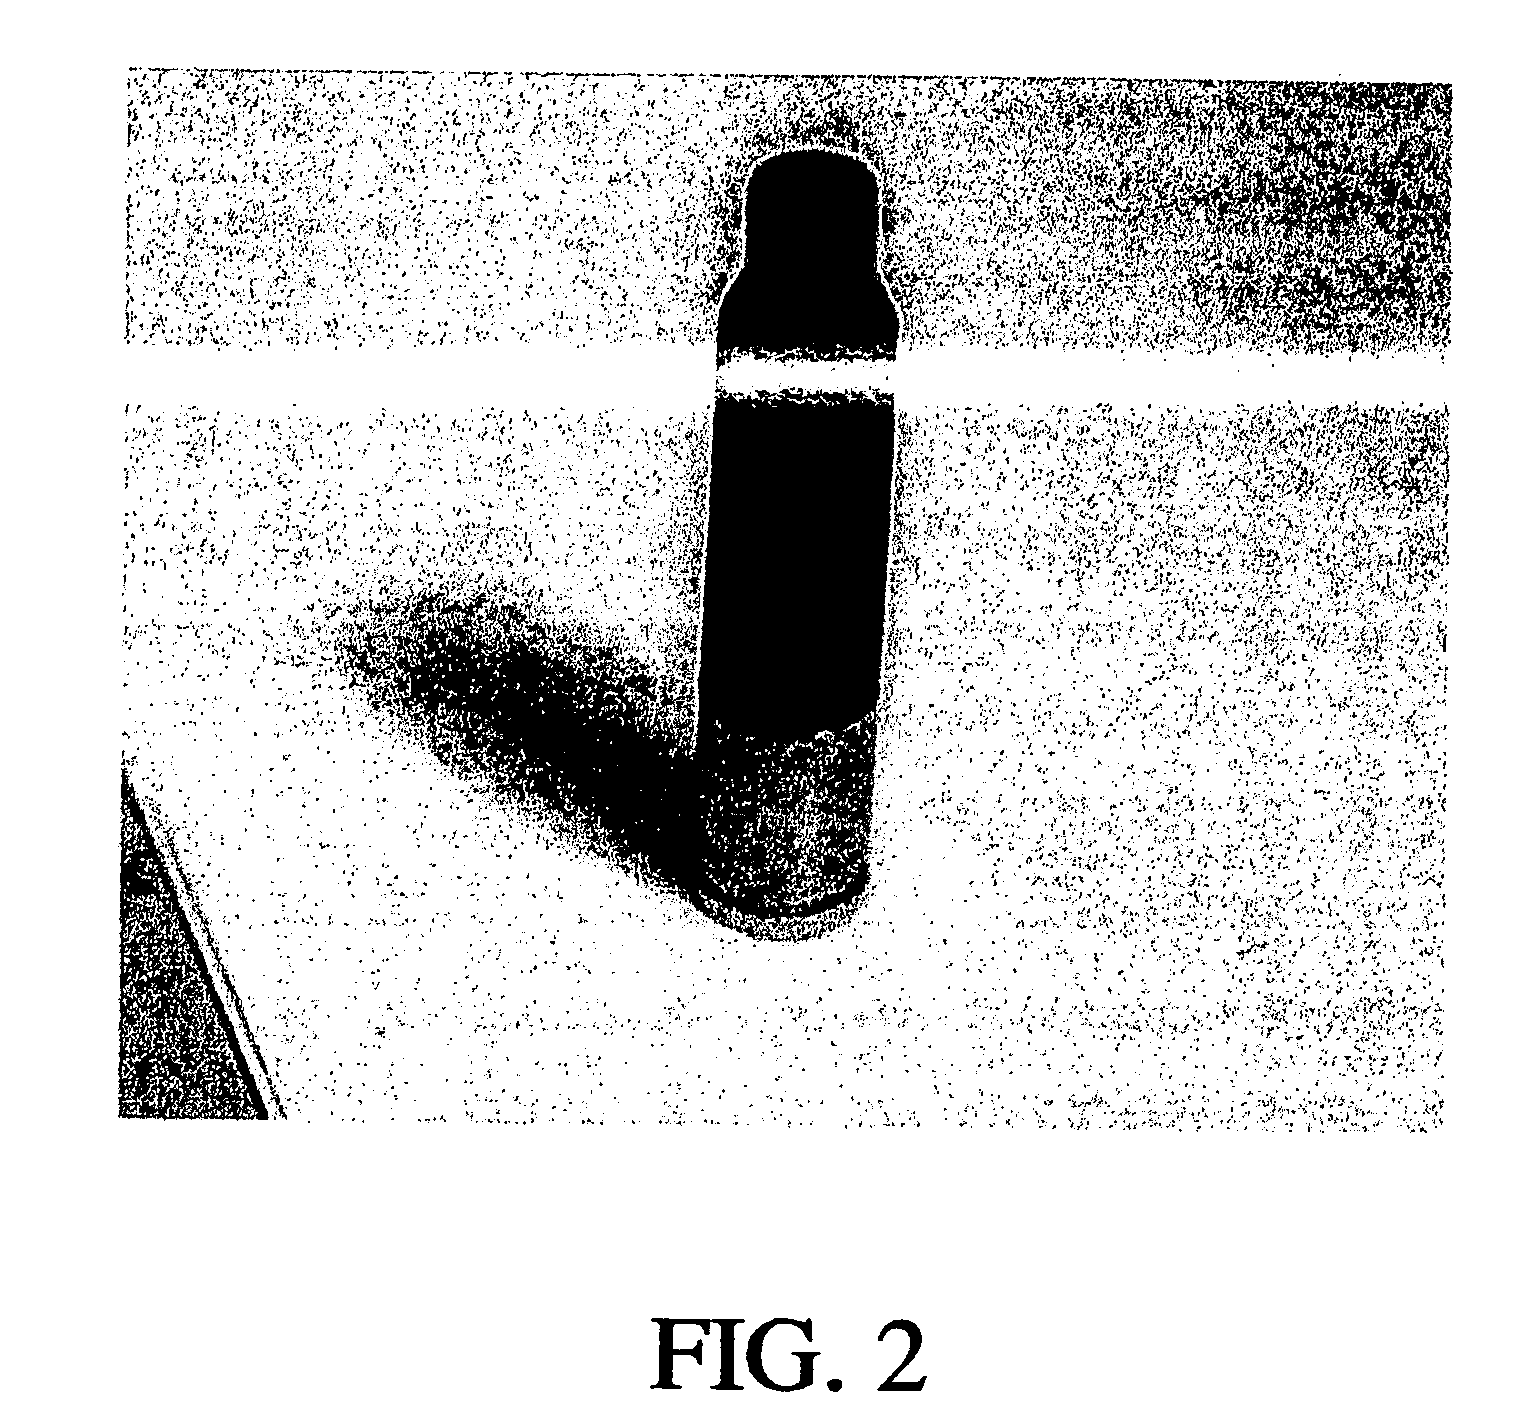 Article comprising a fine-grained metallic material and a polymeric material